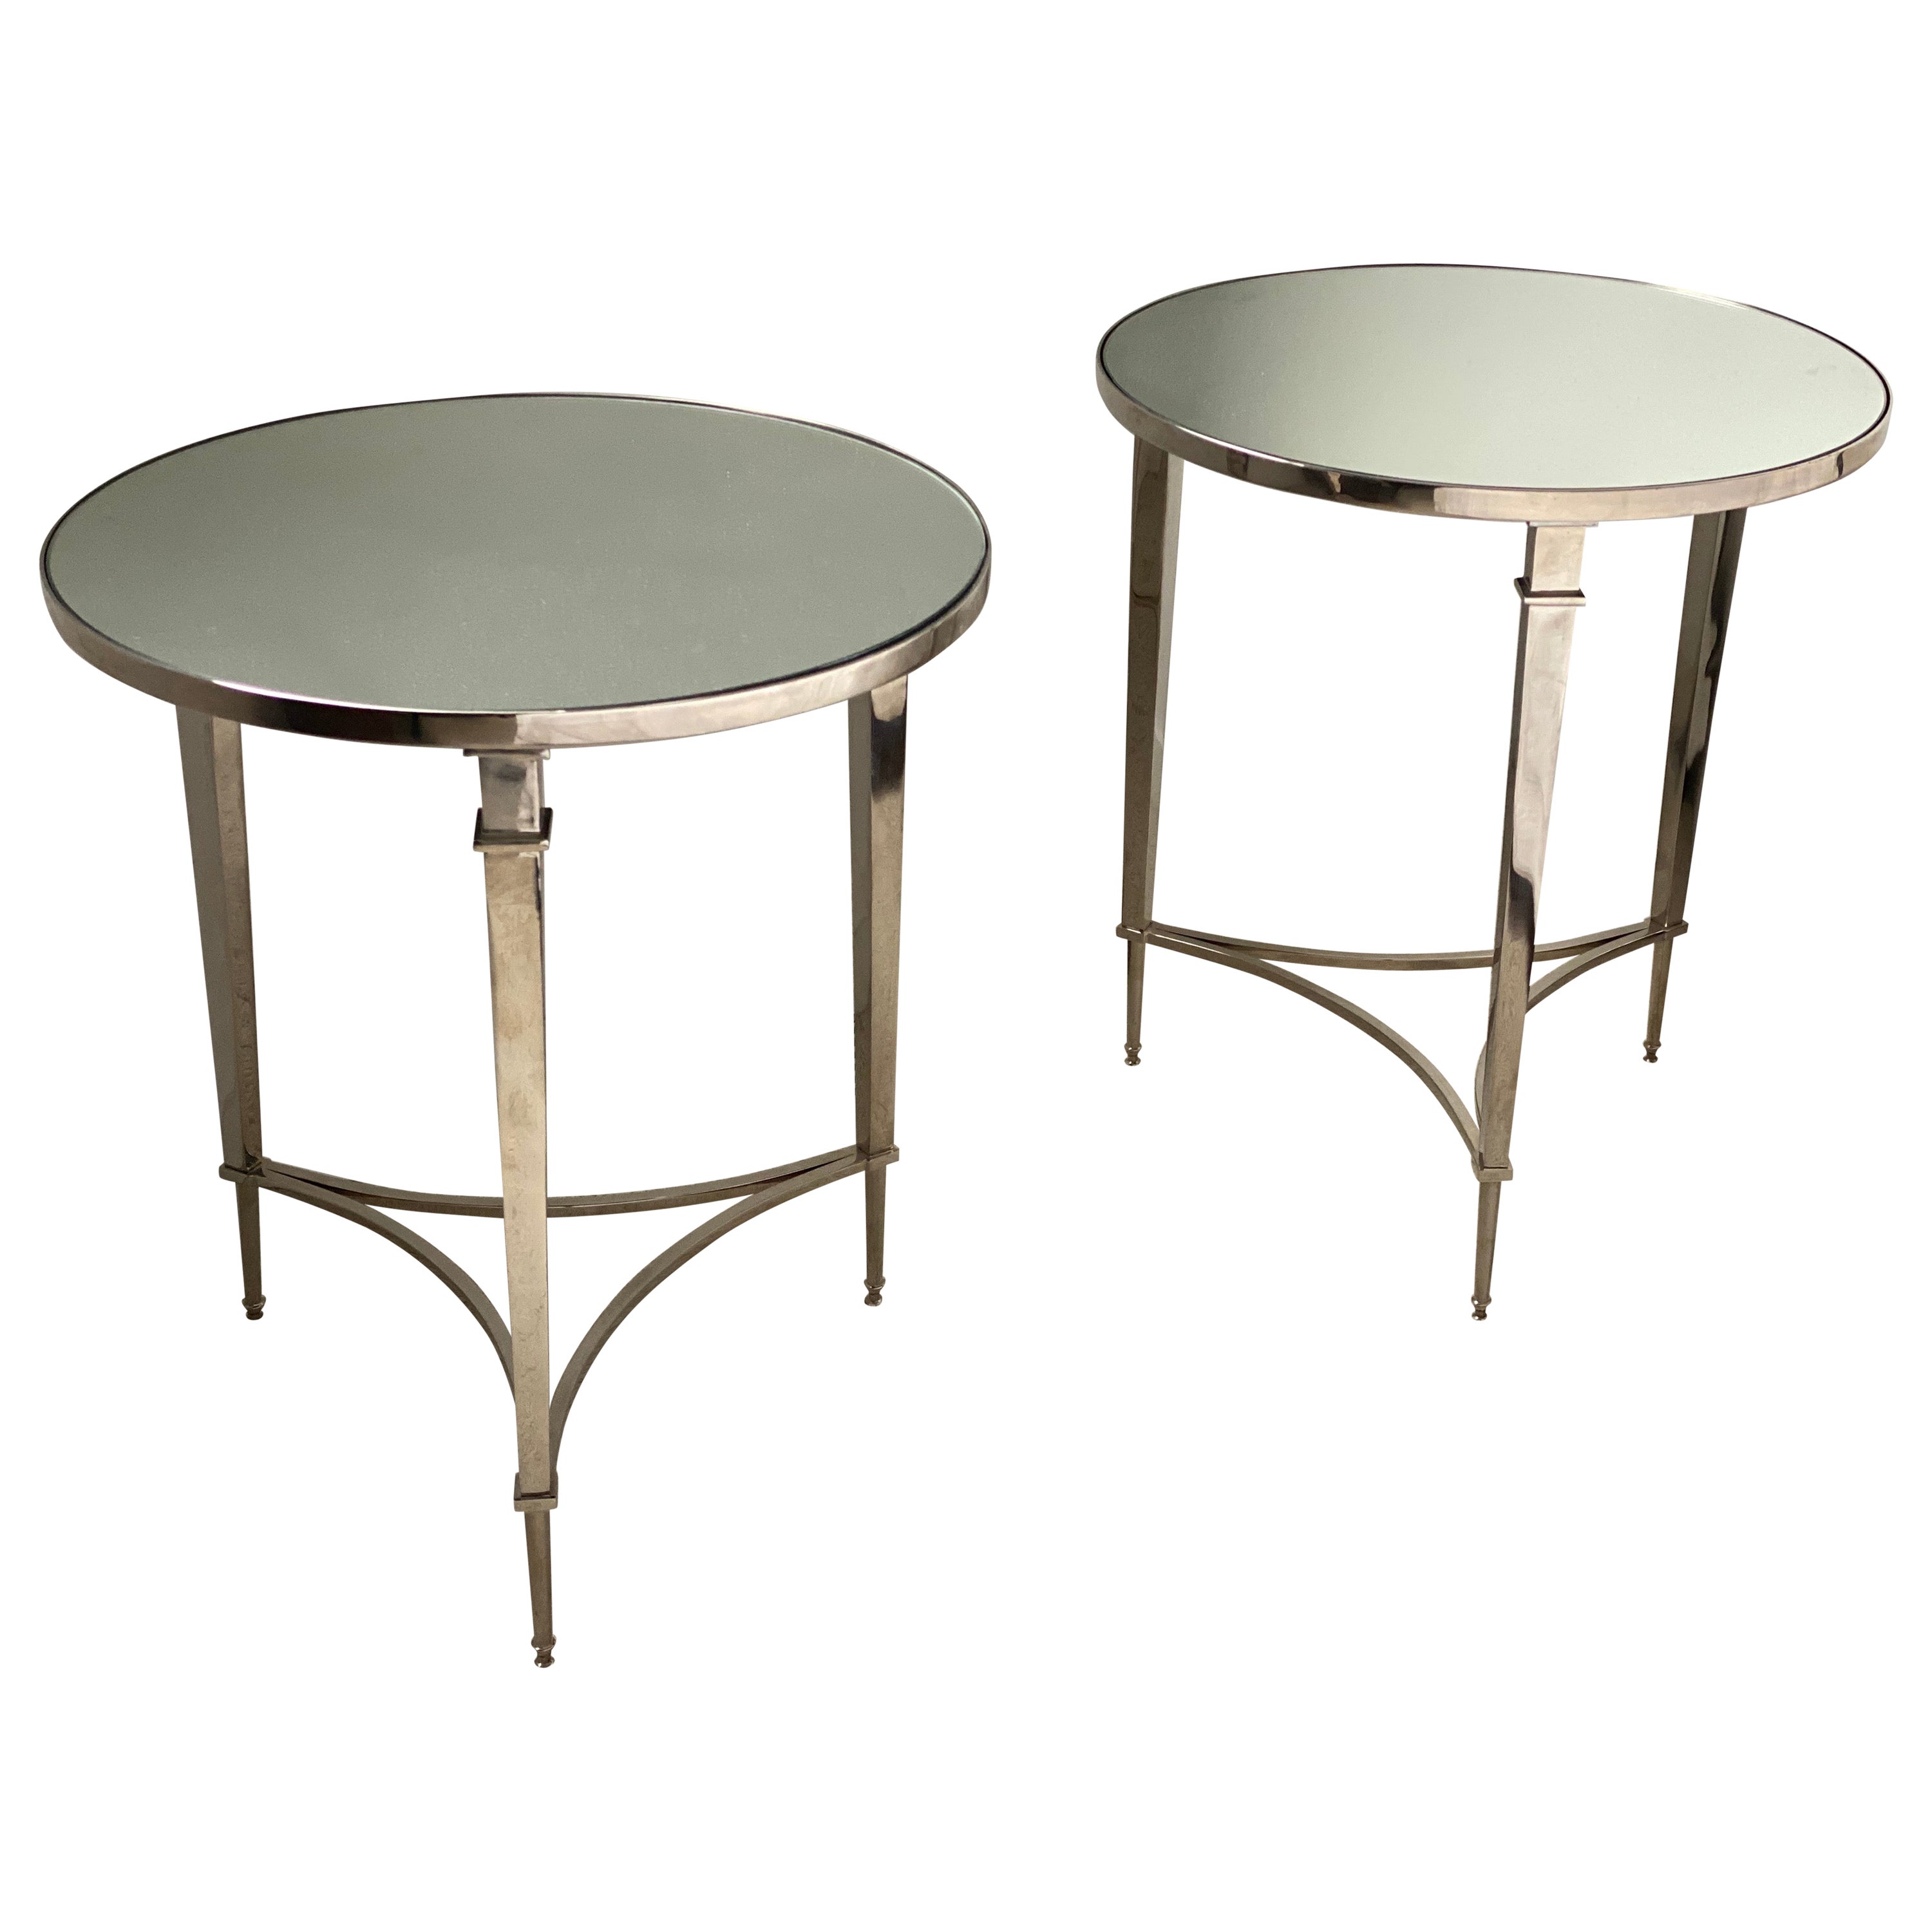 Pair of Modern Directoire Style Round Nickel End Tables with Mirror Tops